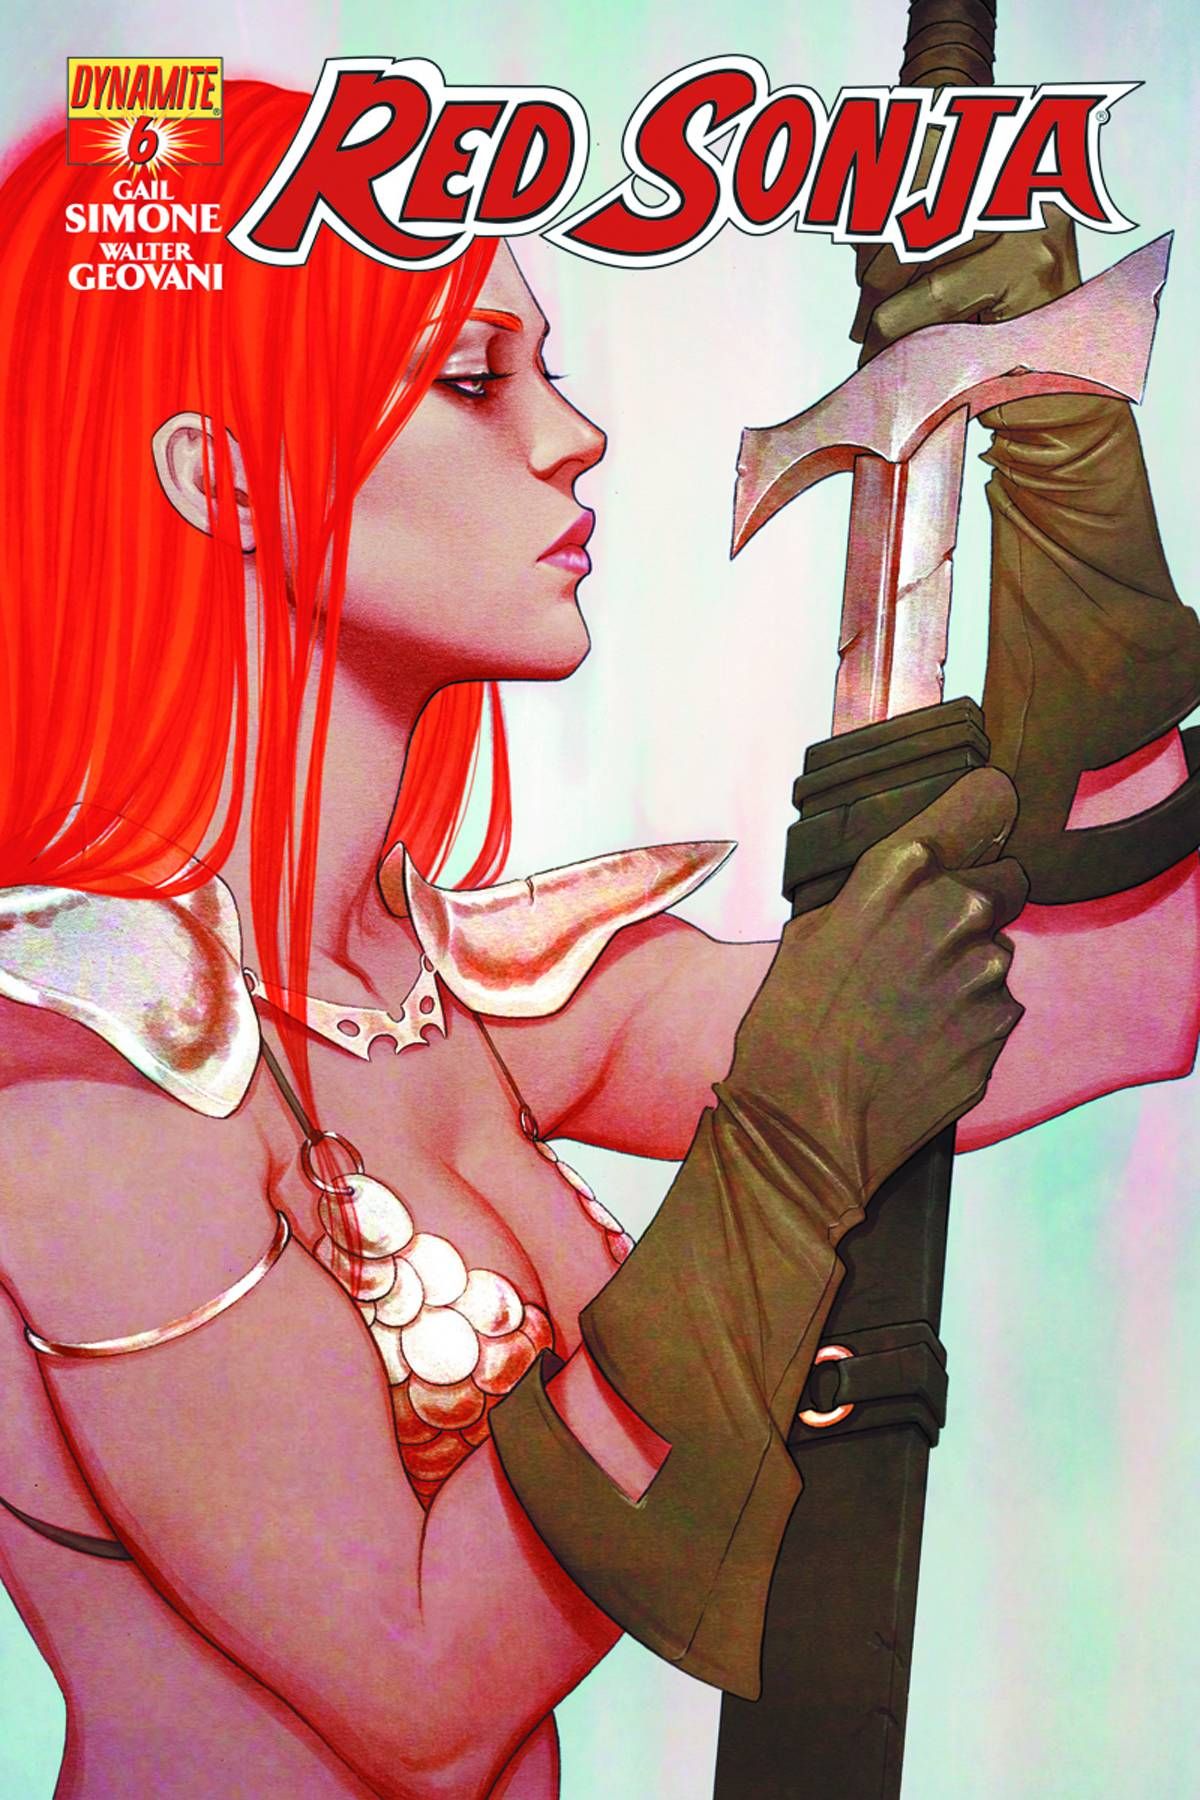 Red Sonja #6 [Frison Cover] Comic